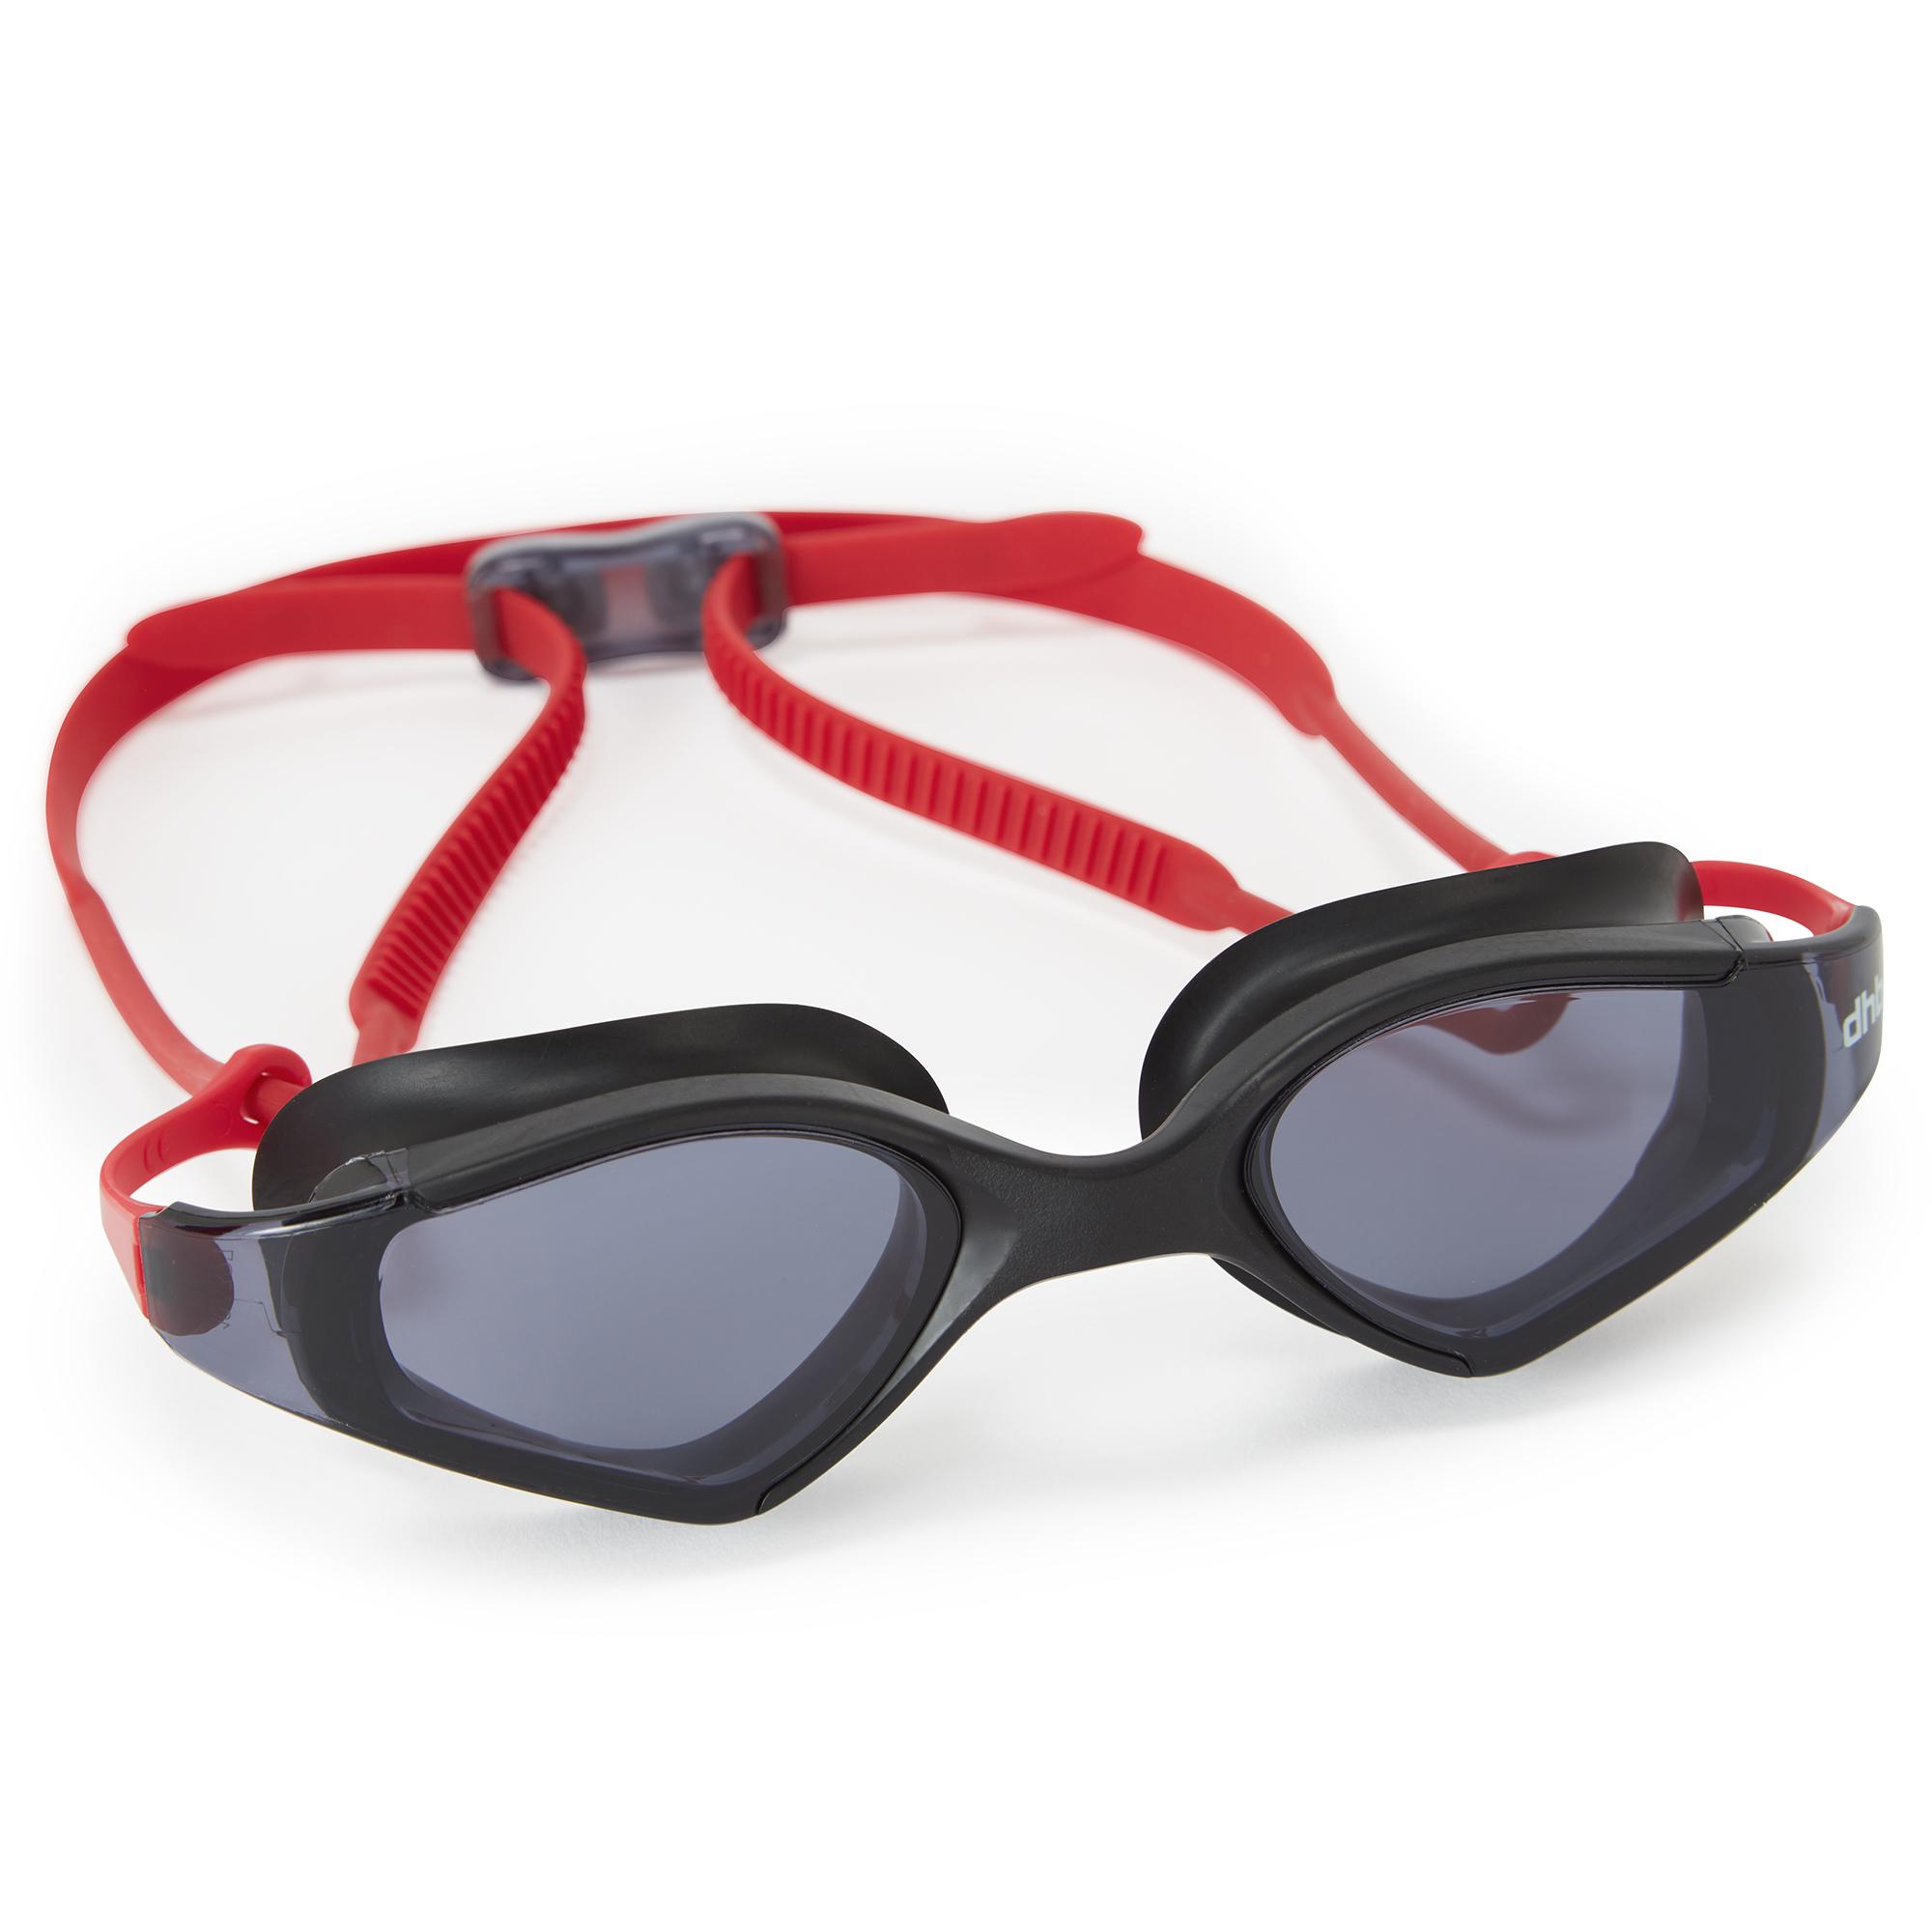 Dhb Aeron Open Water Goggles - Clear Lens - Black/red